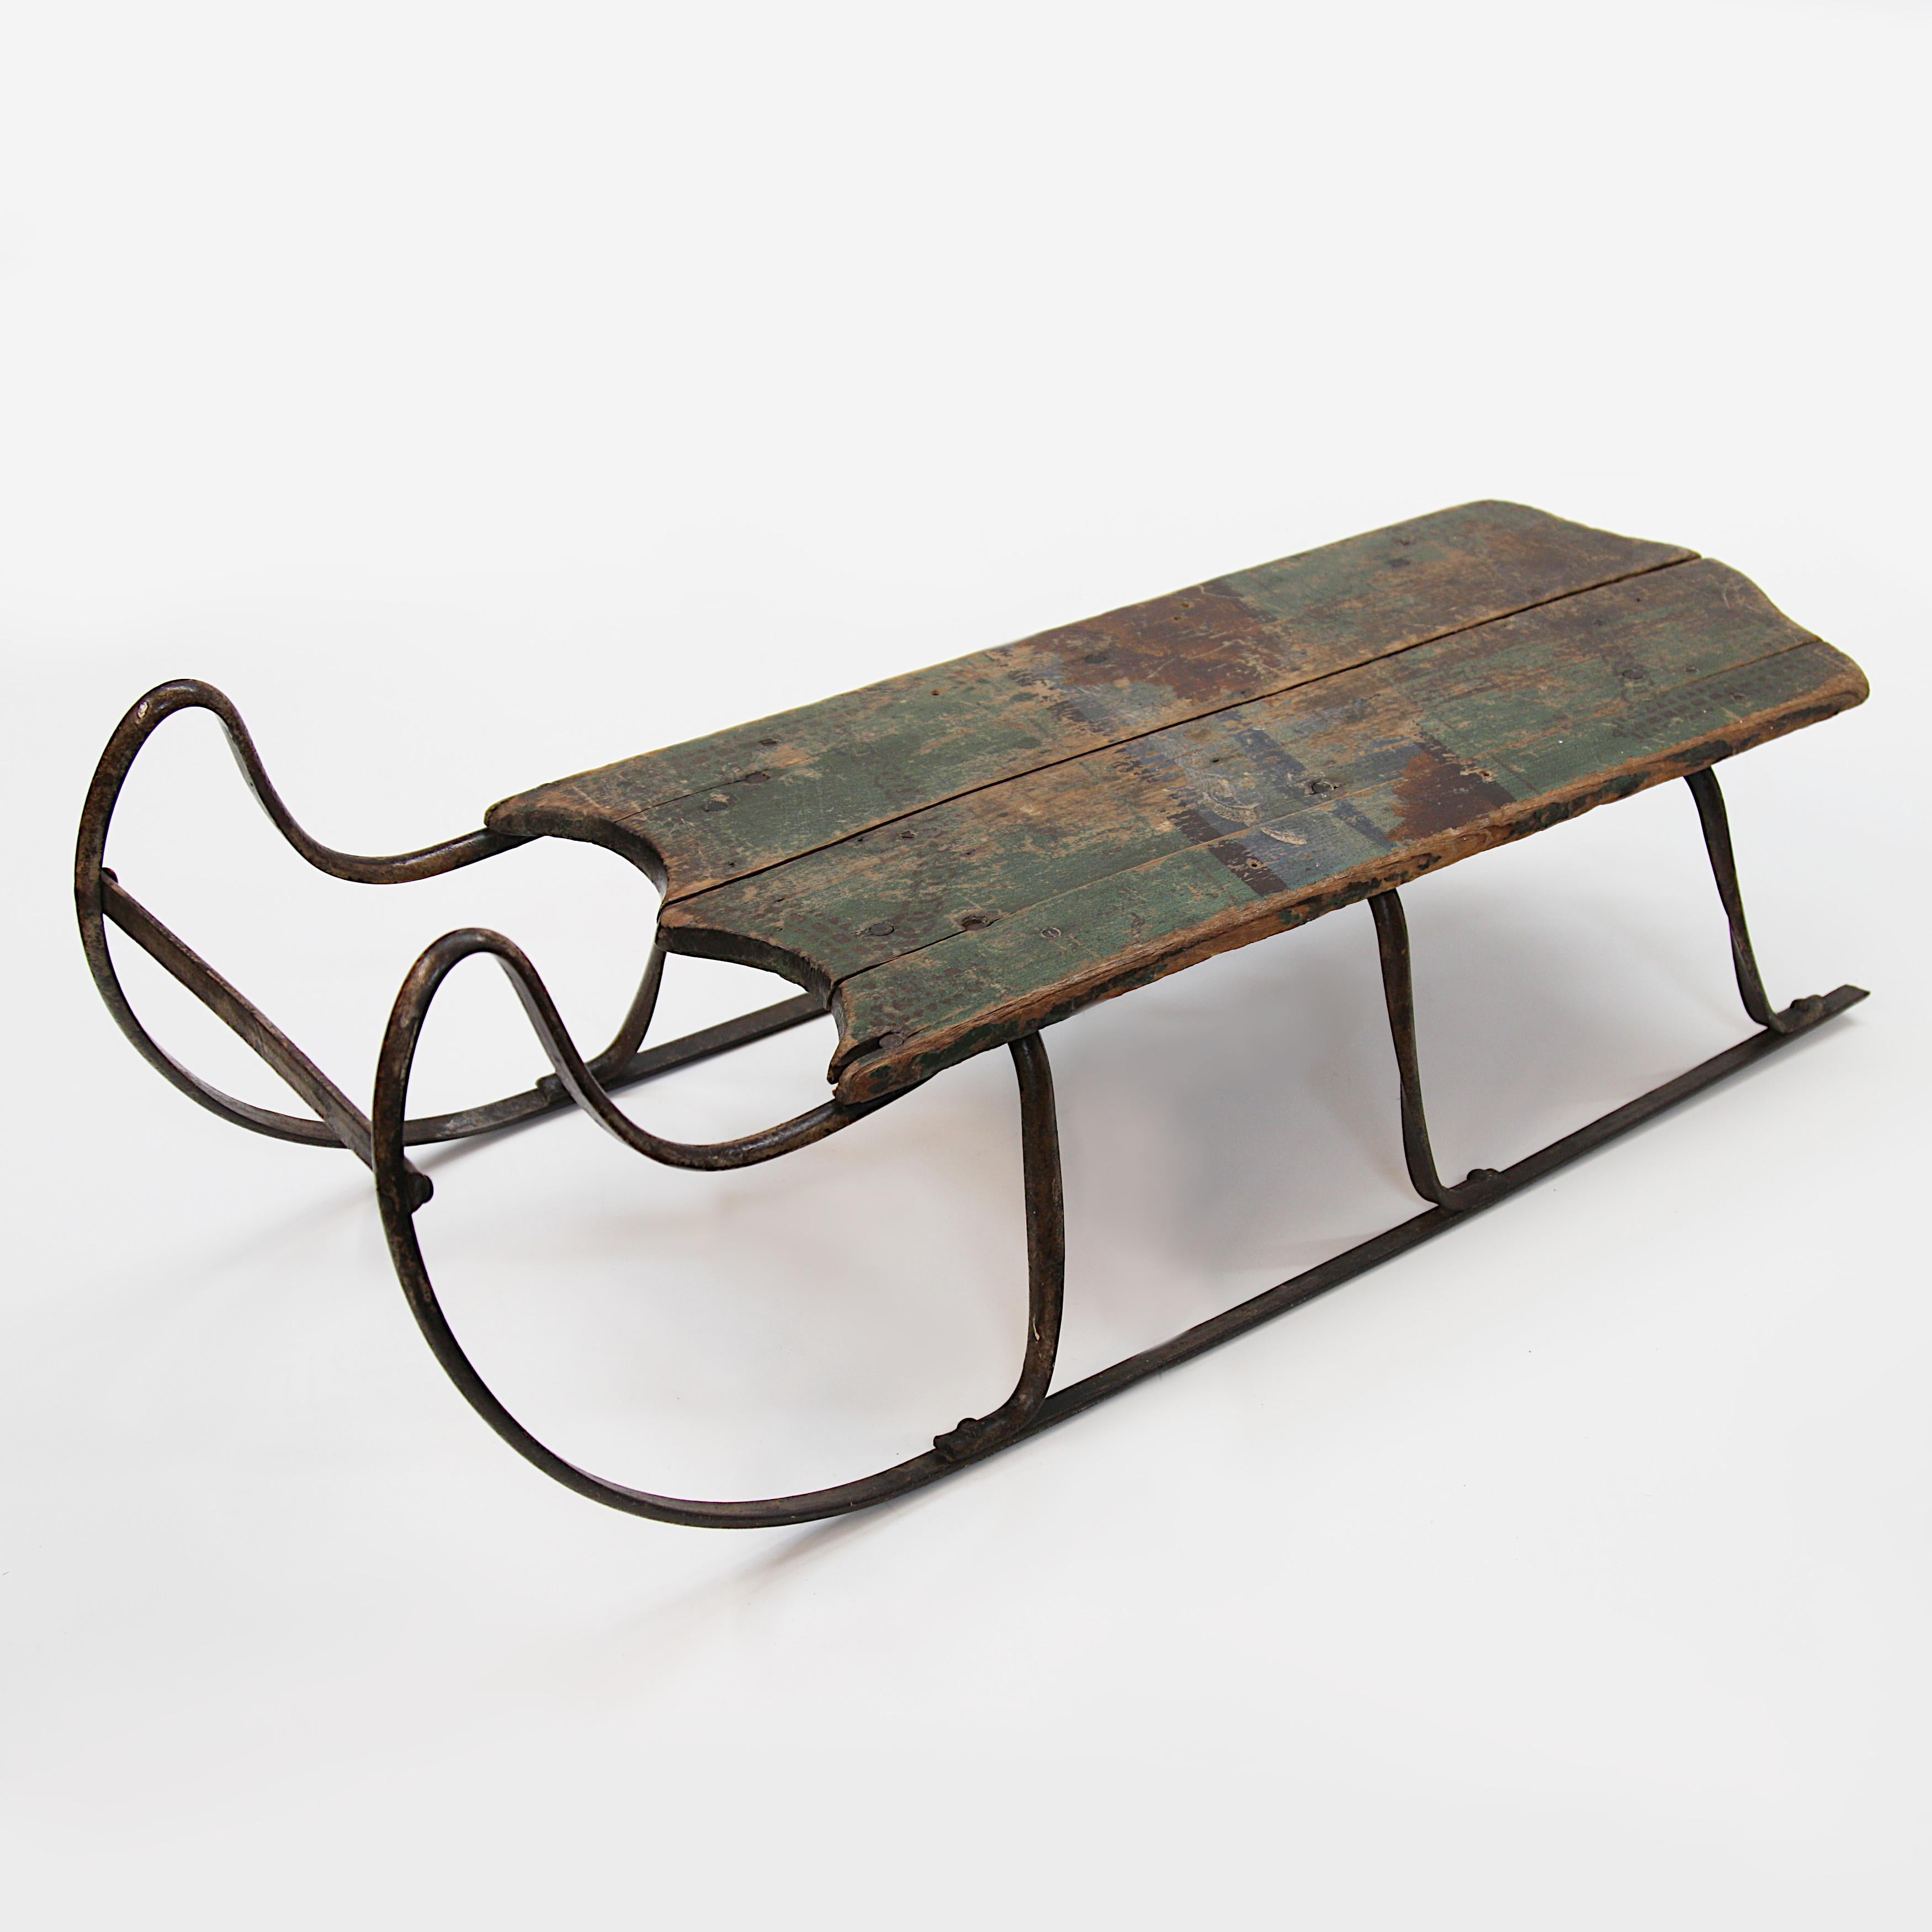 Charming child-size sled from the mid to late 19th century. Sled features forged/riveted iron runners, wooden deck, and original hand painted patina. Wonderful size and wonderful patina!